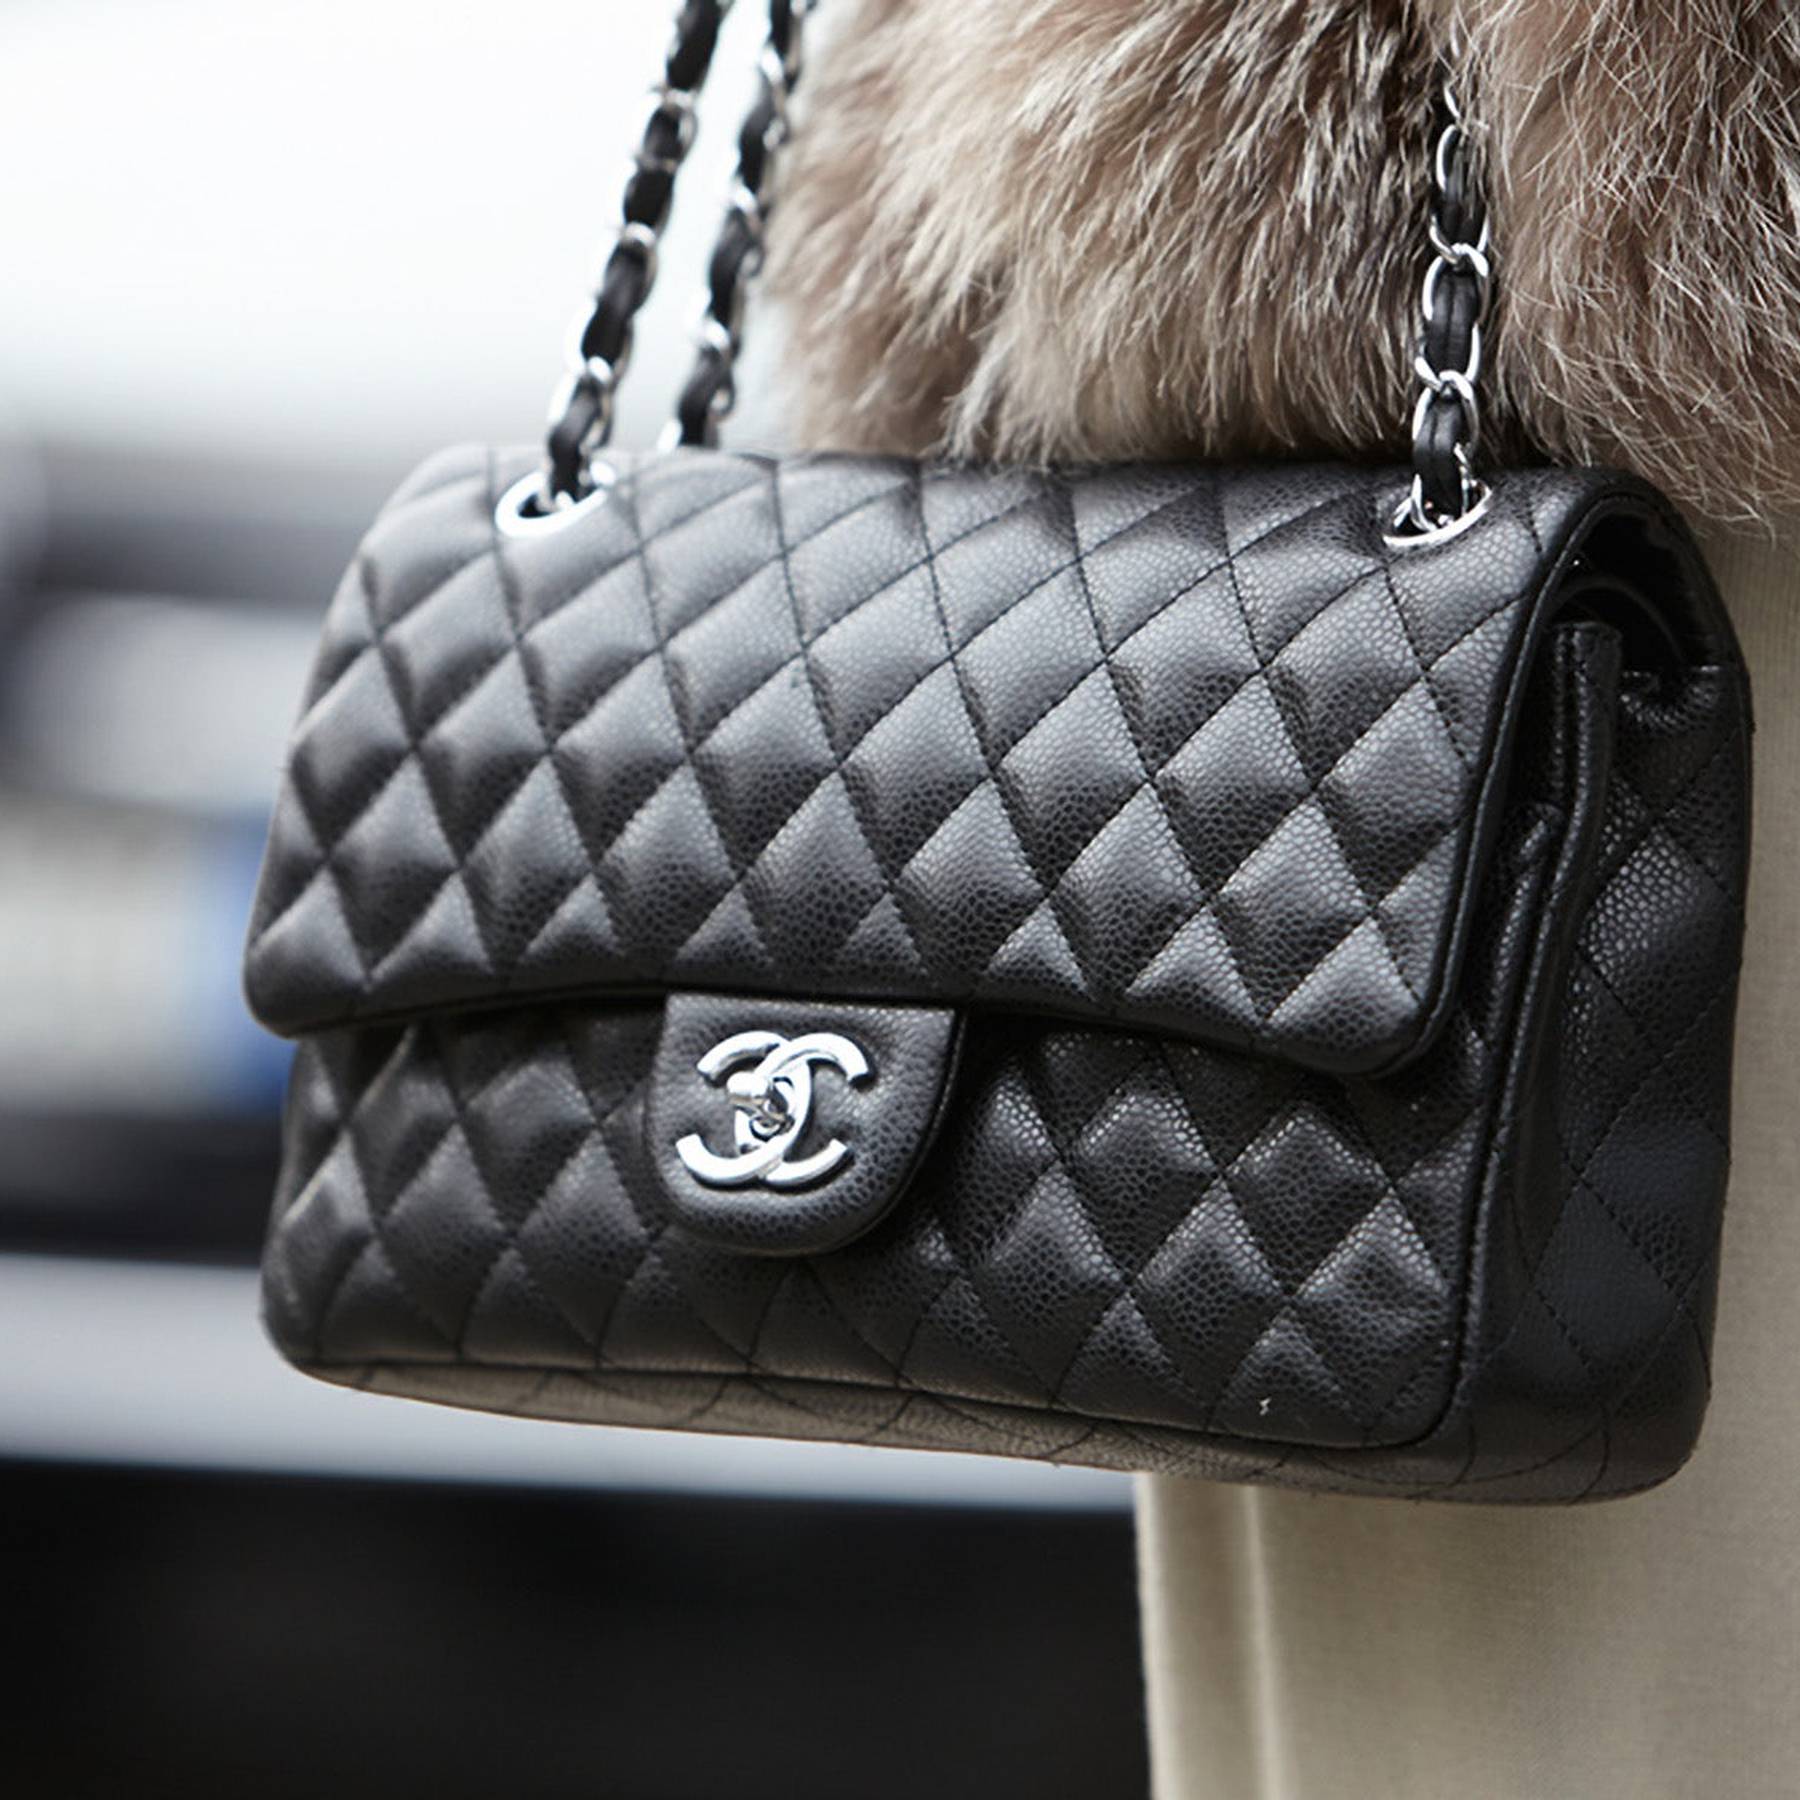 Why are Chanel Bags so Popular?